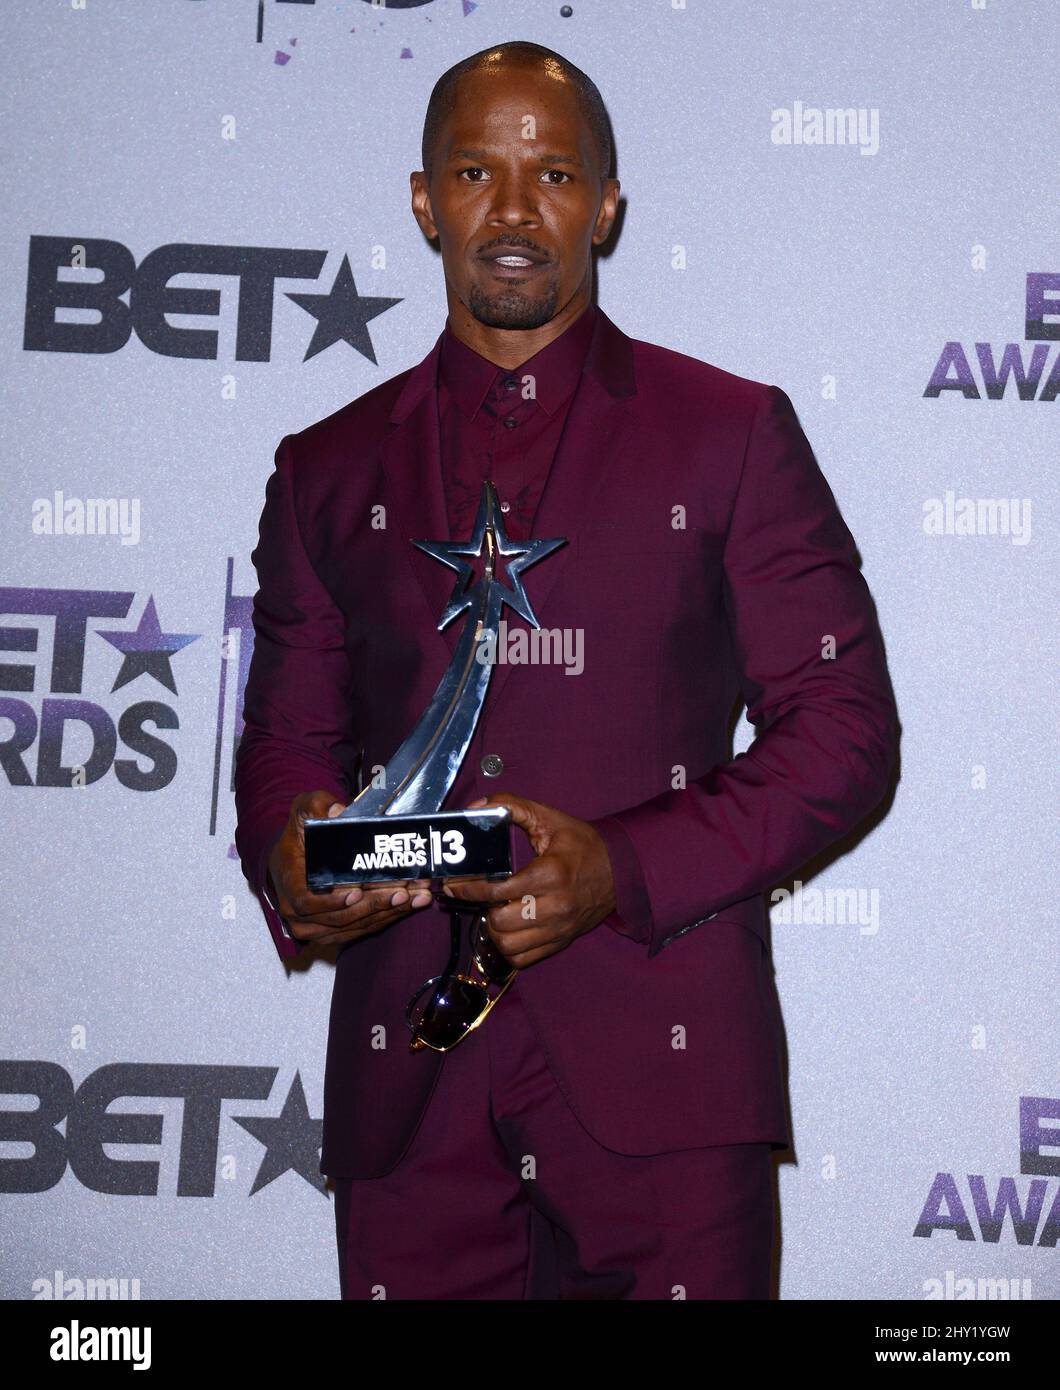 Jamie Foxx poses backstage with the award for best actor for 'Django: Unchained' at the BET Awards at the Nokia Theatre on Sunday, June 30, 2013, in Los Angeles. Stock Photo